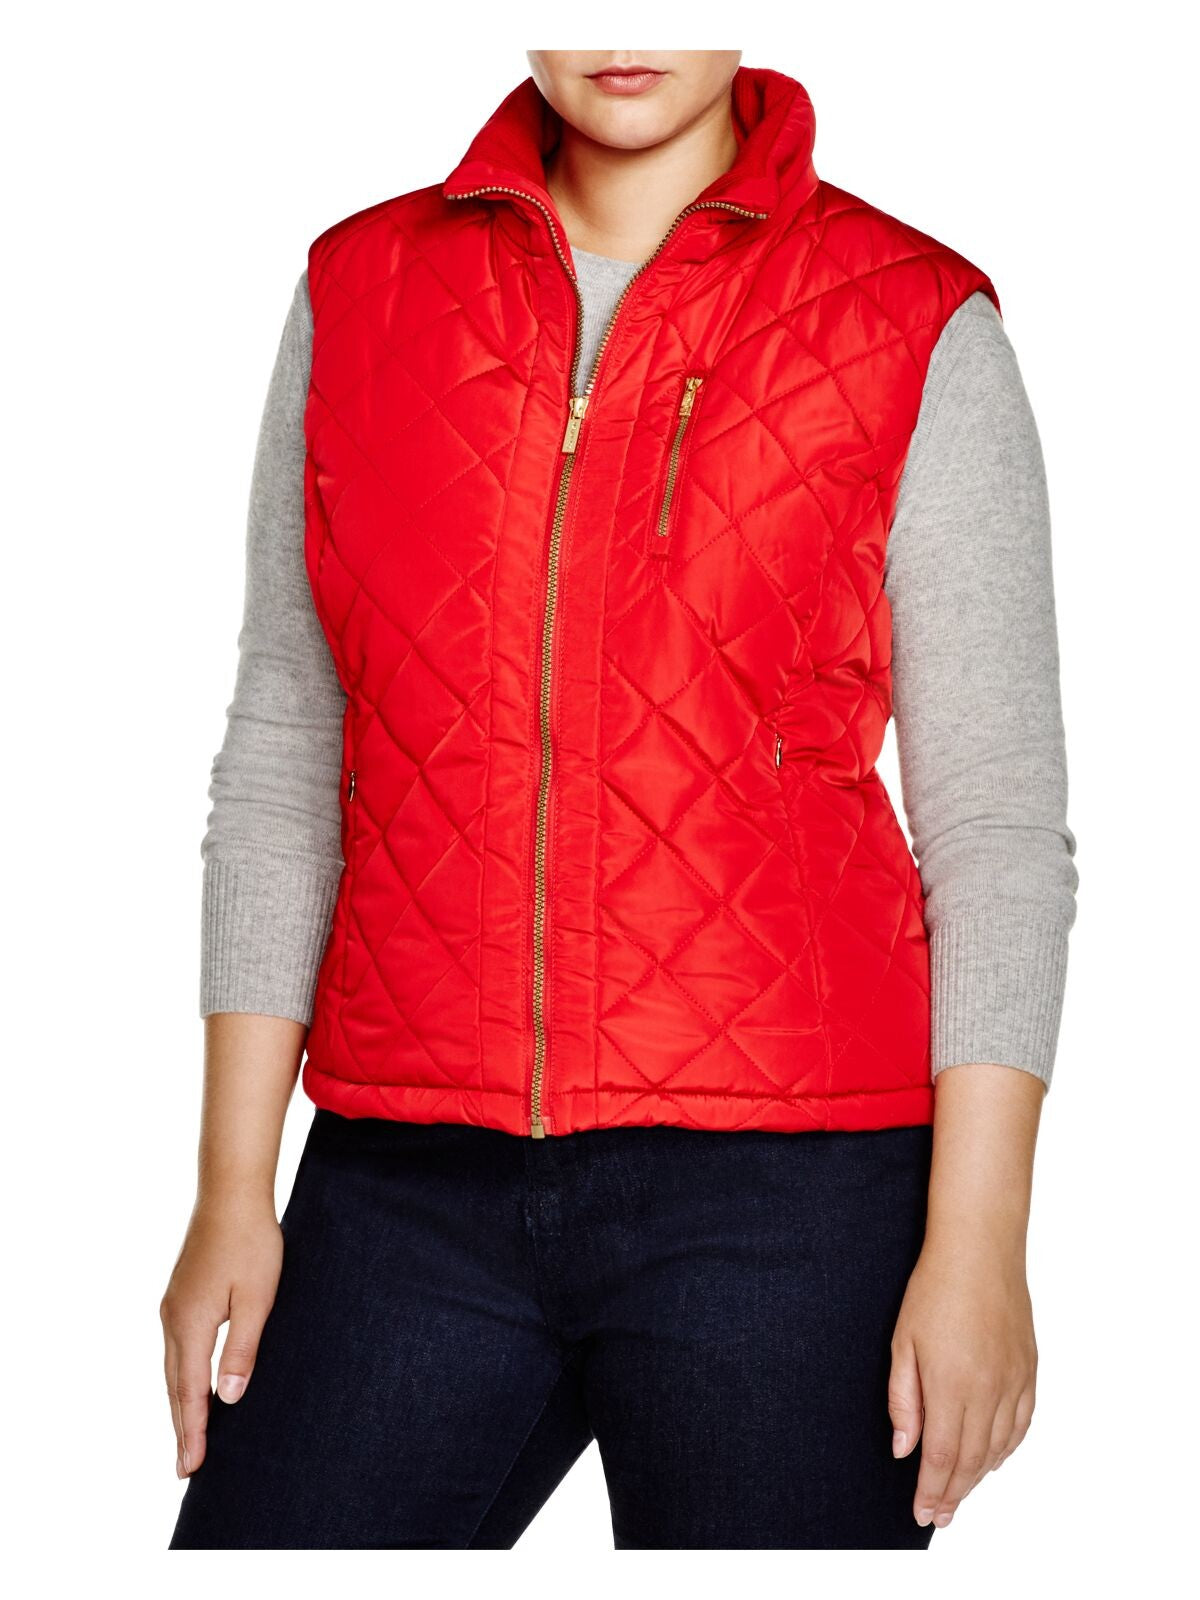 CALVIN KLEIN Womens Red Ribbed Pocketed Quilted Zip Up Sleeveless Mock Neck Vest Top Plus 2X